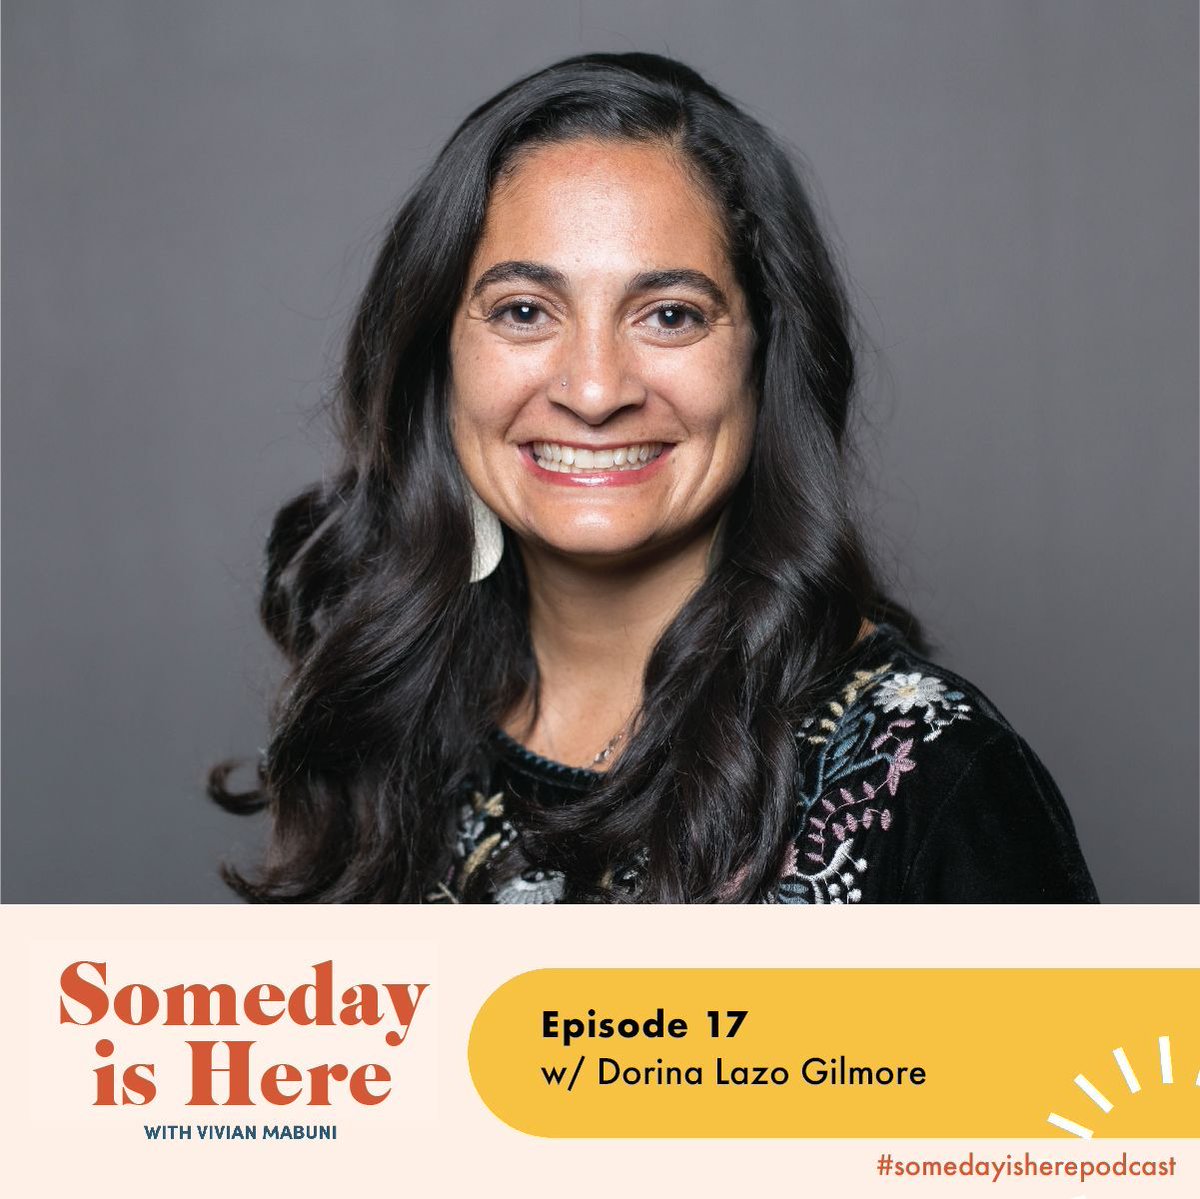 New episode!  An author and speaker, @DorinaGilmore is a woman of grace, kindness, strength and generosity. Can’t wait for you to hear our conversation. Listen now with the link in our bio!
#somedayisnowpodcast #asianamericanpodcast #asianamericanwomen #asianamerican #leadership